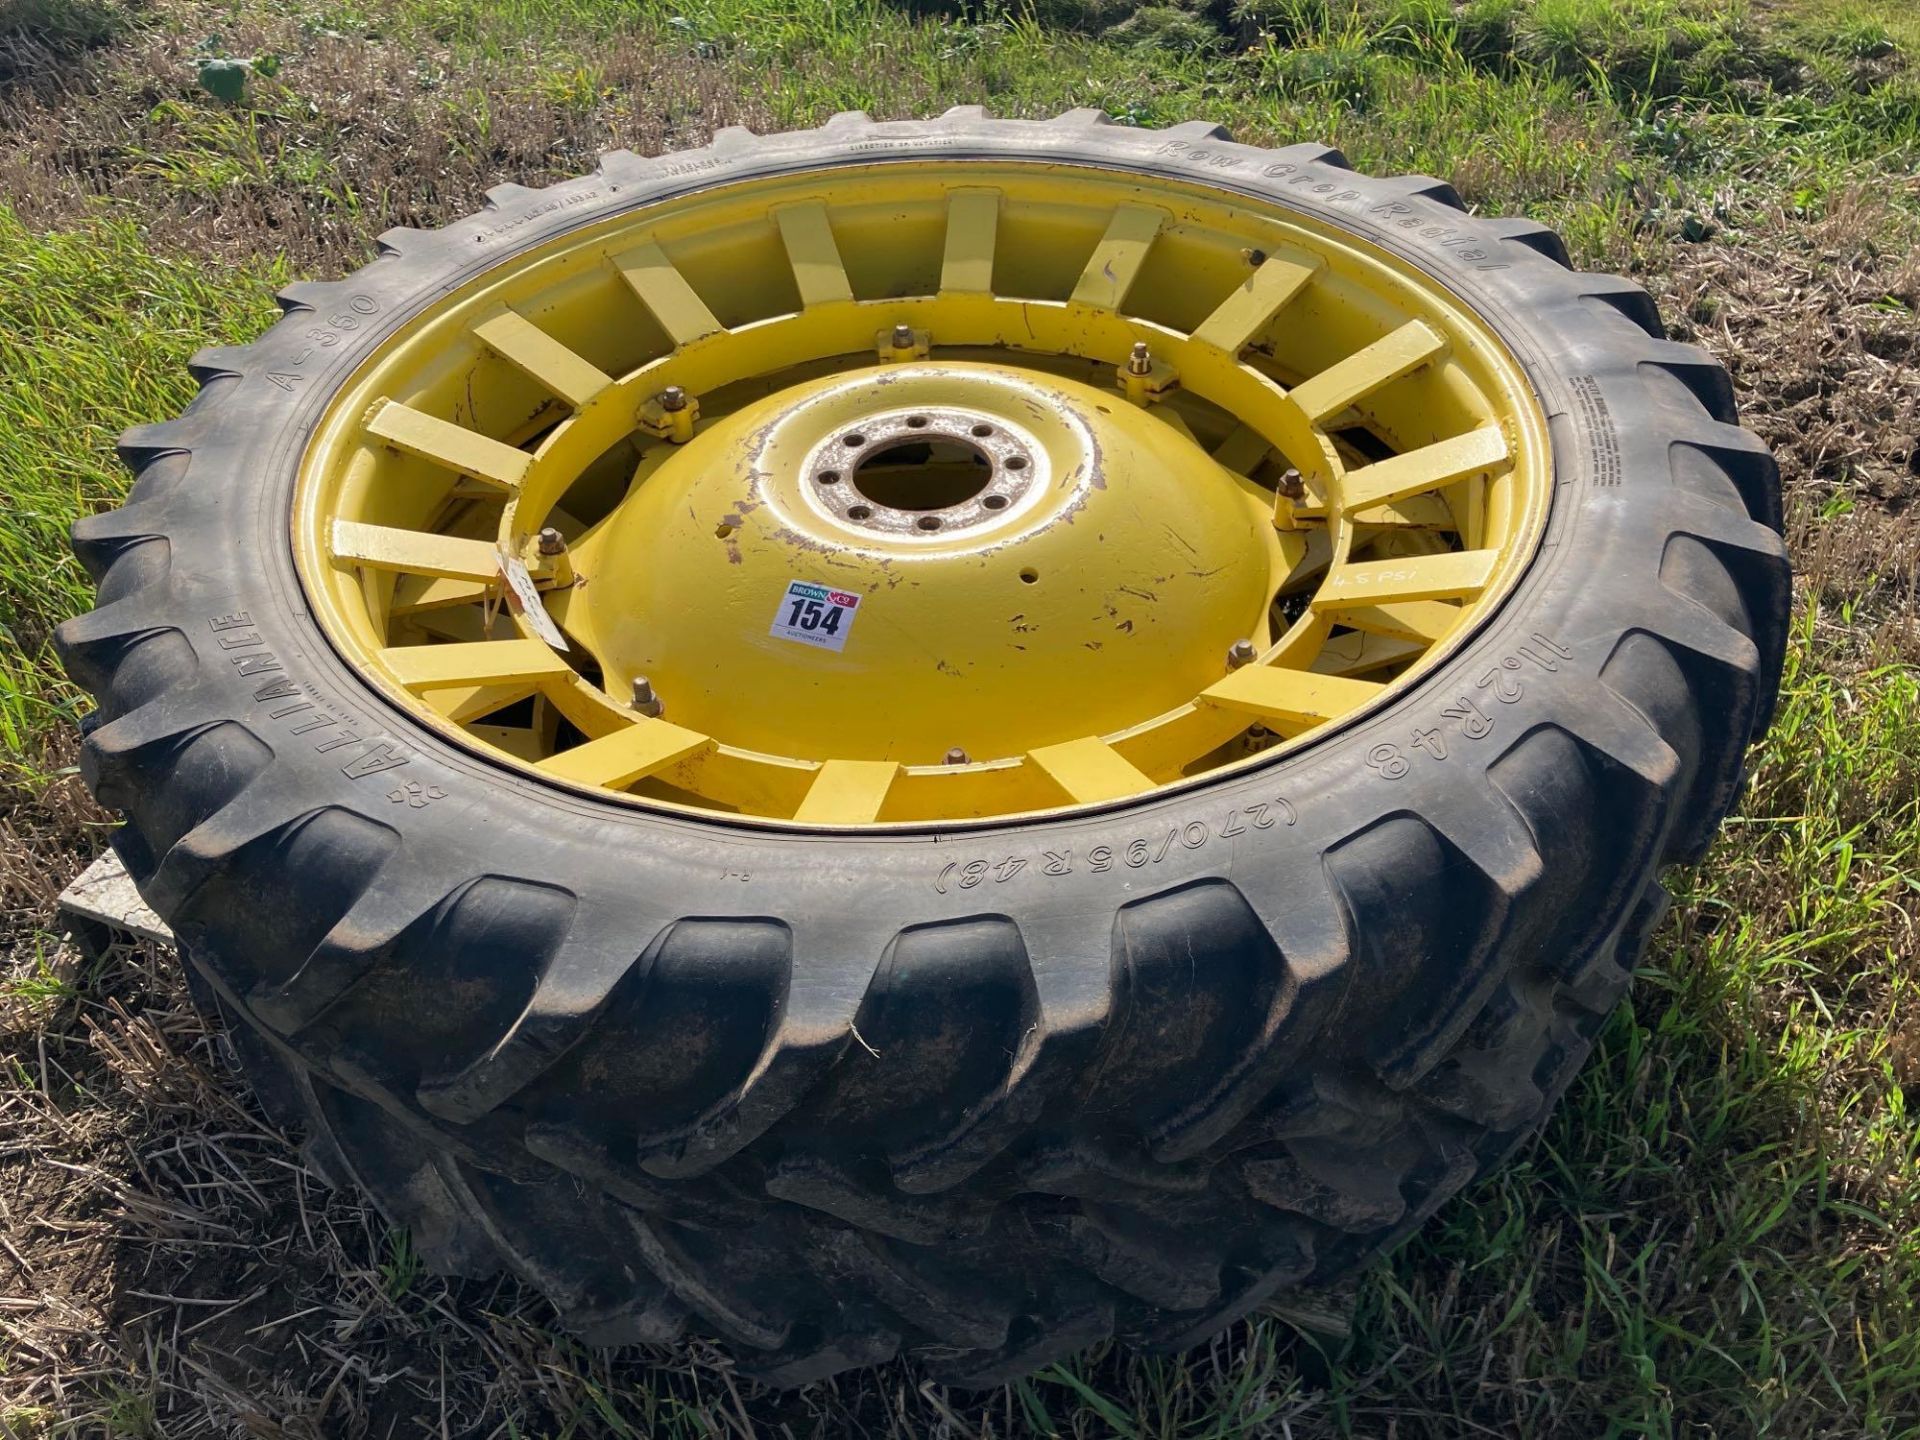 Pair Alliance 11.2R48 row crop wheels and tyres with JD/MF centres